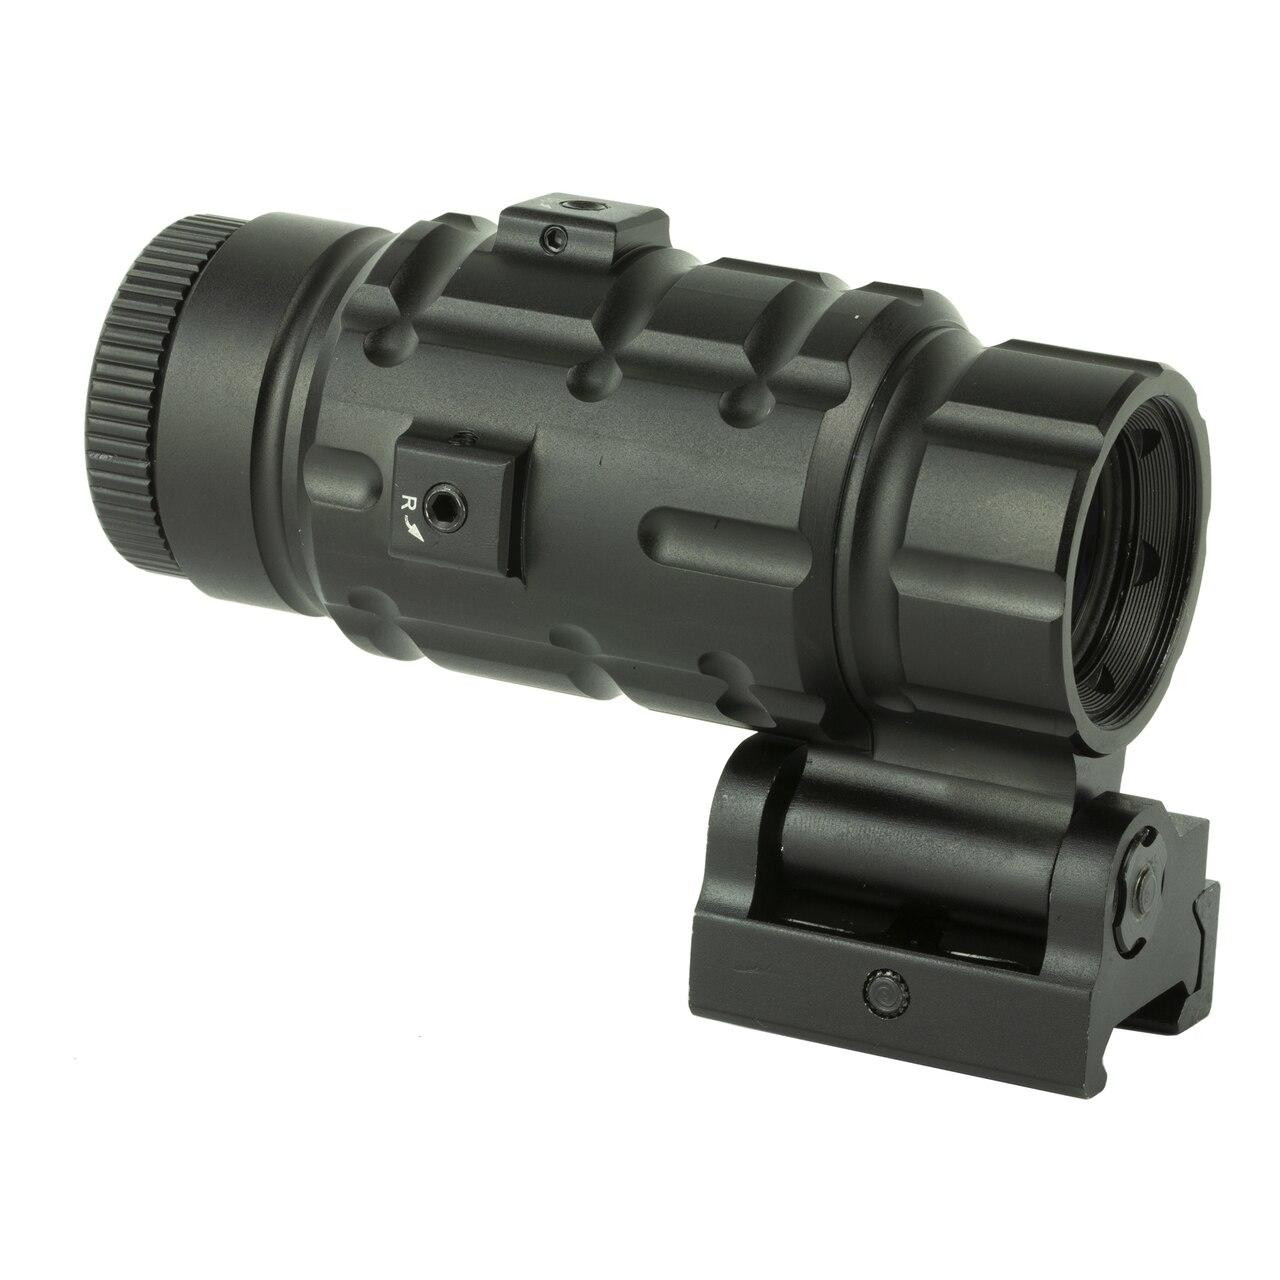 Leapers, Inc - UTG Utg 3x Magnifier W/fts Qd Mnt 4717385550469